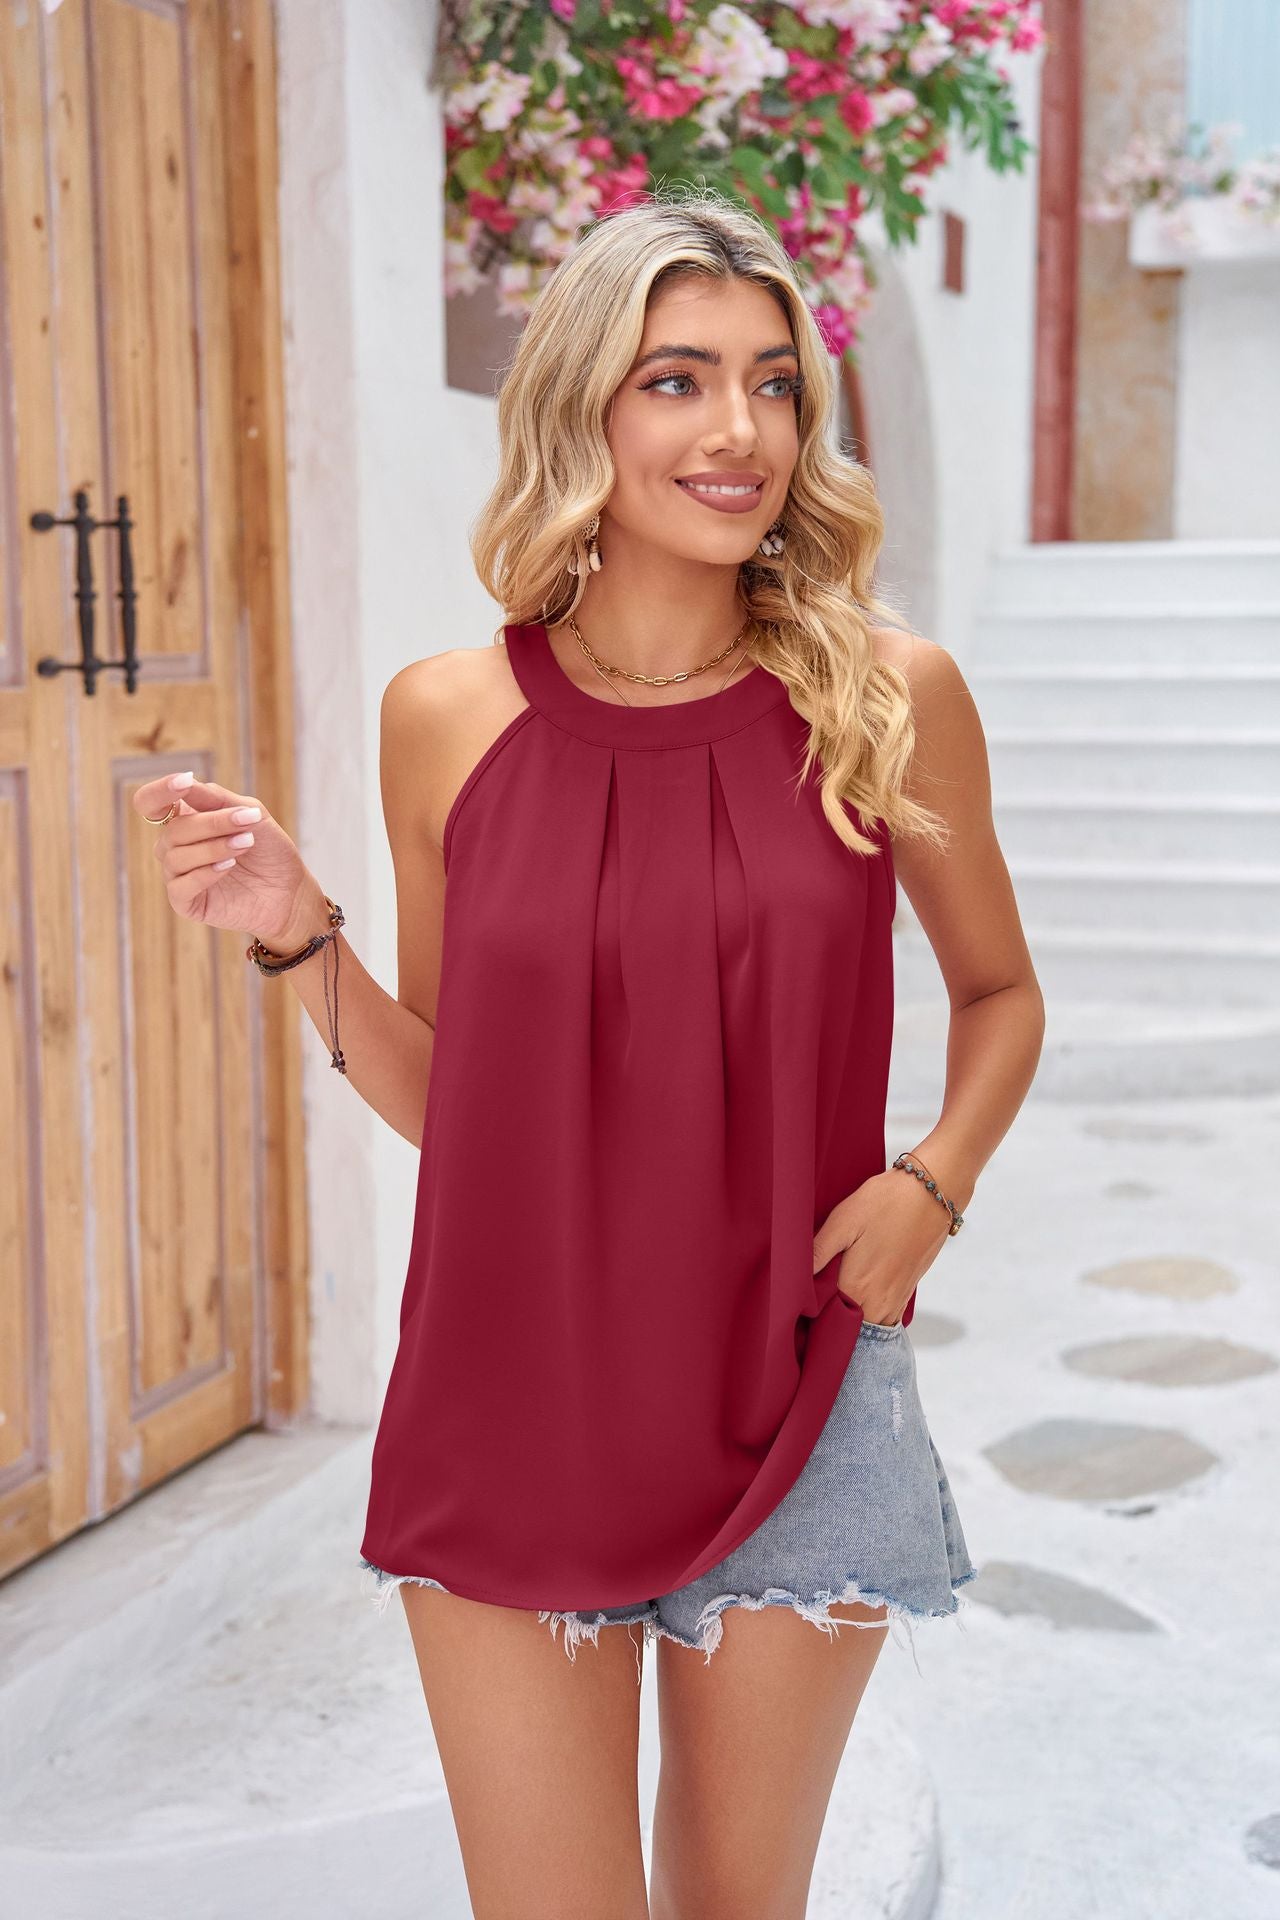 Grecian Neck Sleeveless Top Shirts & Tops Krazy Heart Designs Boutique Wine S 